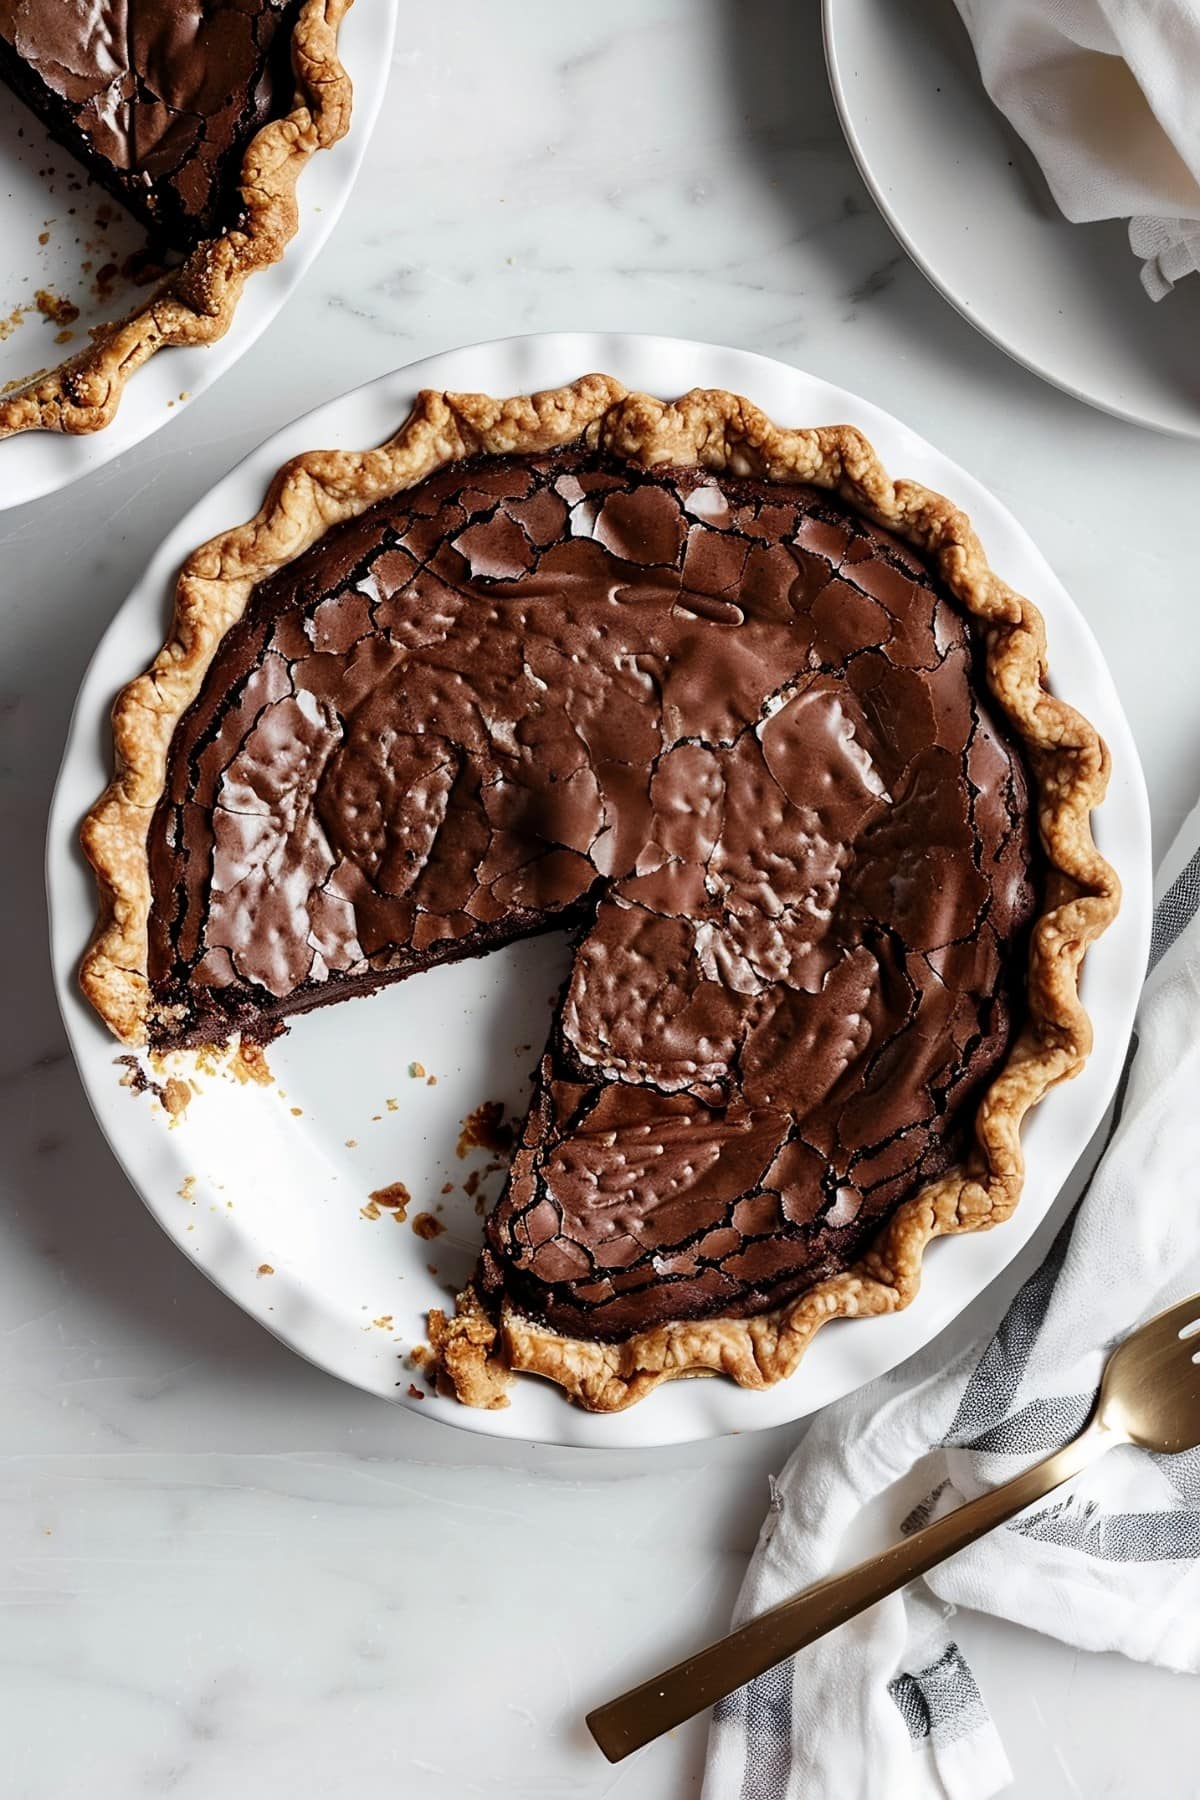 Irresistible brownie pie with a crackly top and a melt-in-your-mouth chocolatey center